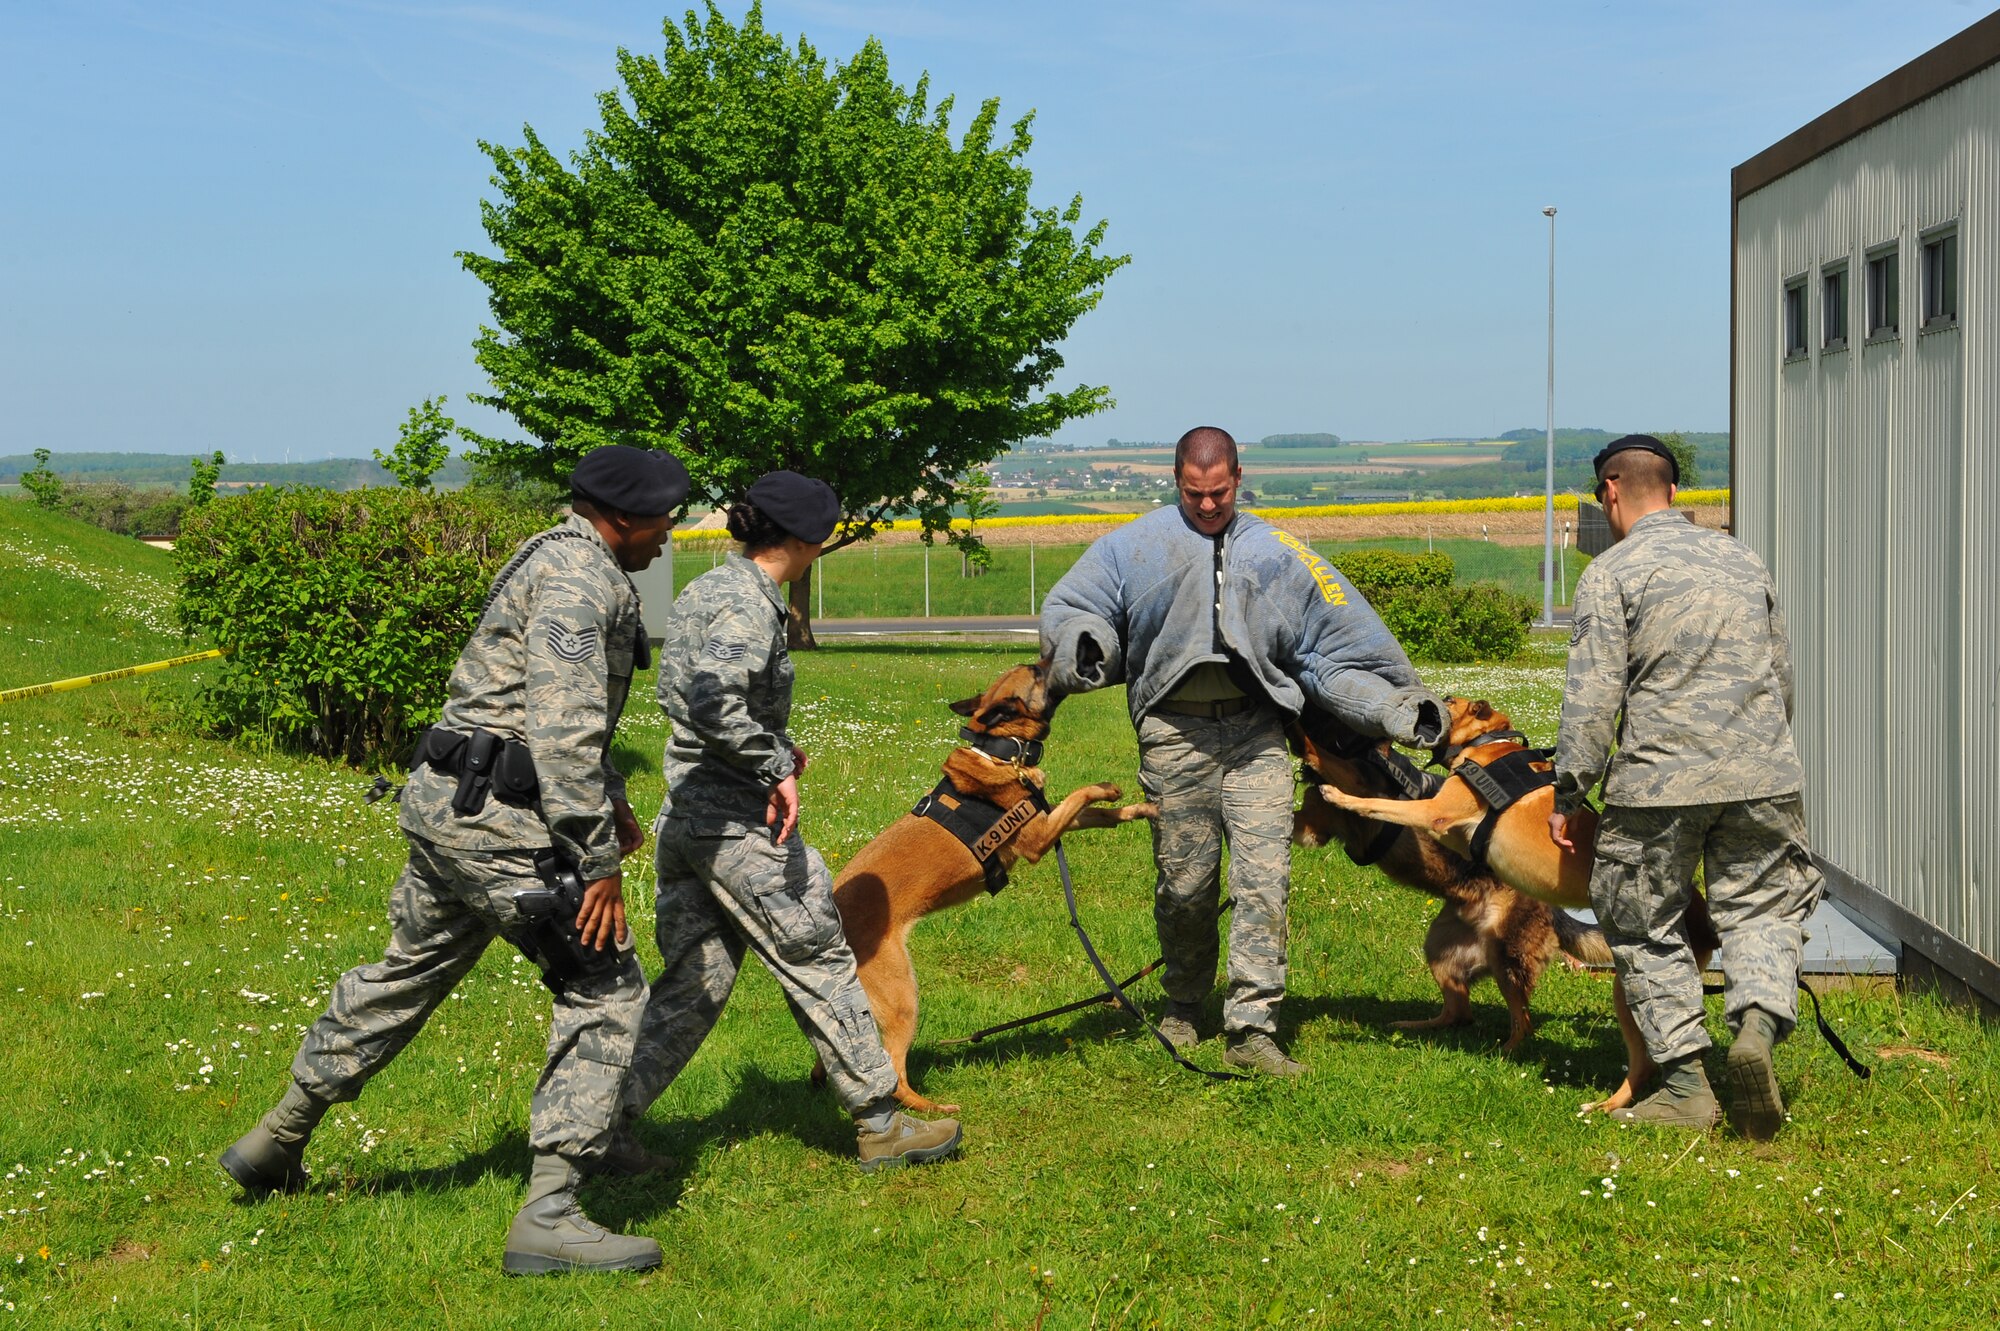 SPANGDAHLEM AIR BASE, Germany – Military working dogs and their handlers demonstrate how three dogs can be used to subdue a single suspect as a part of National Police Week outside the Spangdahlem Commissary May 14. The 52nd SFS put on multiple demonstrations such as military working dog capabilities, weapons and combat vehicle displays and taser demonstrations to give spectators an insight into various aspects of security forces capabilities. National Police Week is held annually during the week of May 15 and honors all law enforcement members who have died. National Police Week events continue this week with an annual ruck march around the base May 16 at 10 a.m. and the defender decathlon May 17 beginning at 9 a.m. on Perimeter Road here. (U.S. Air Force photo by Airman 1st Class Dillon Davis/Released)